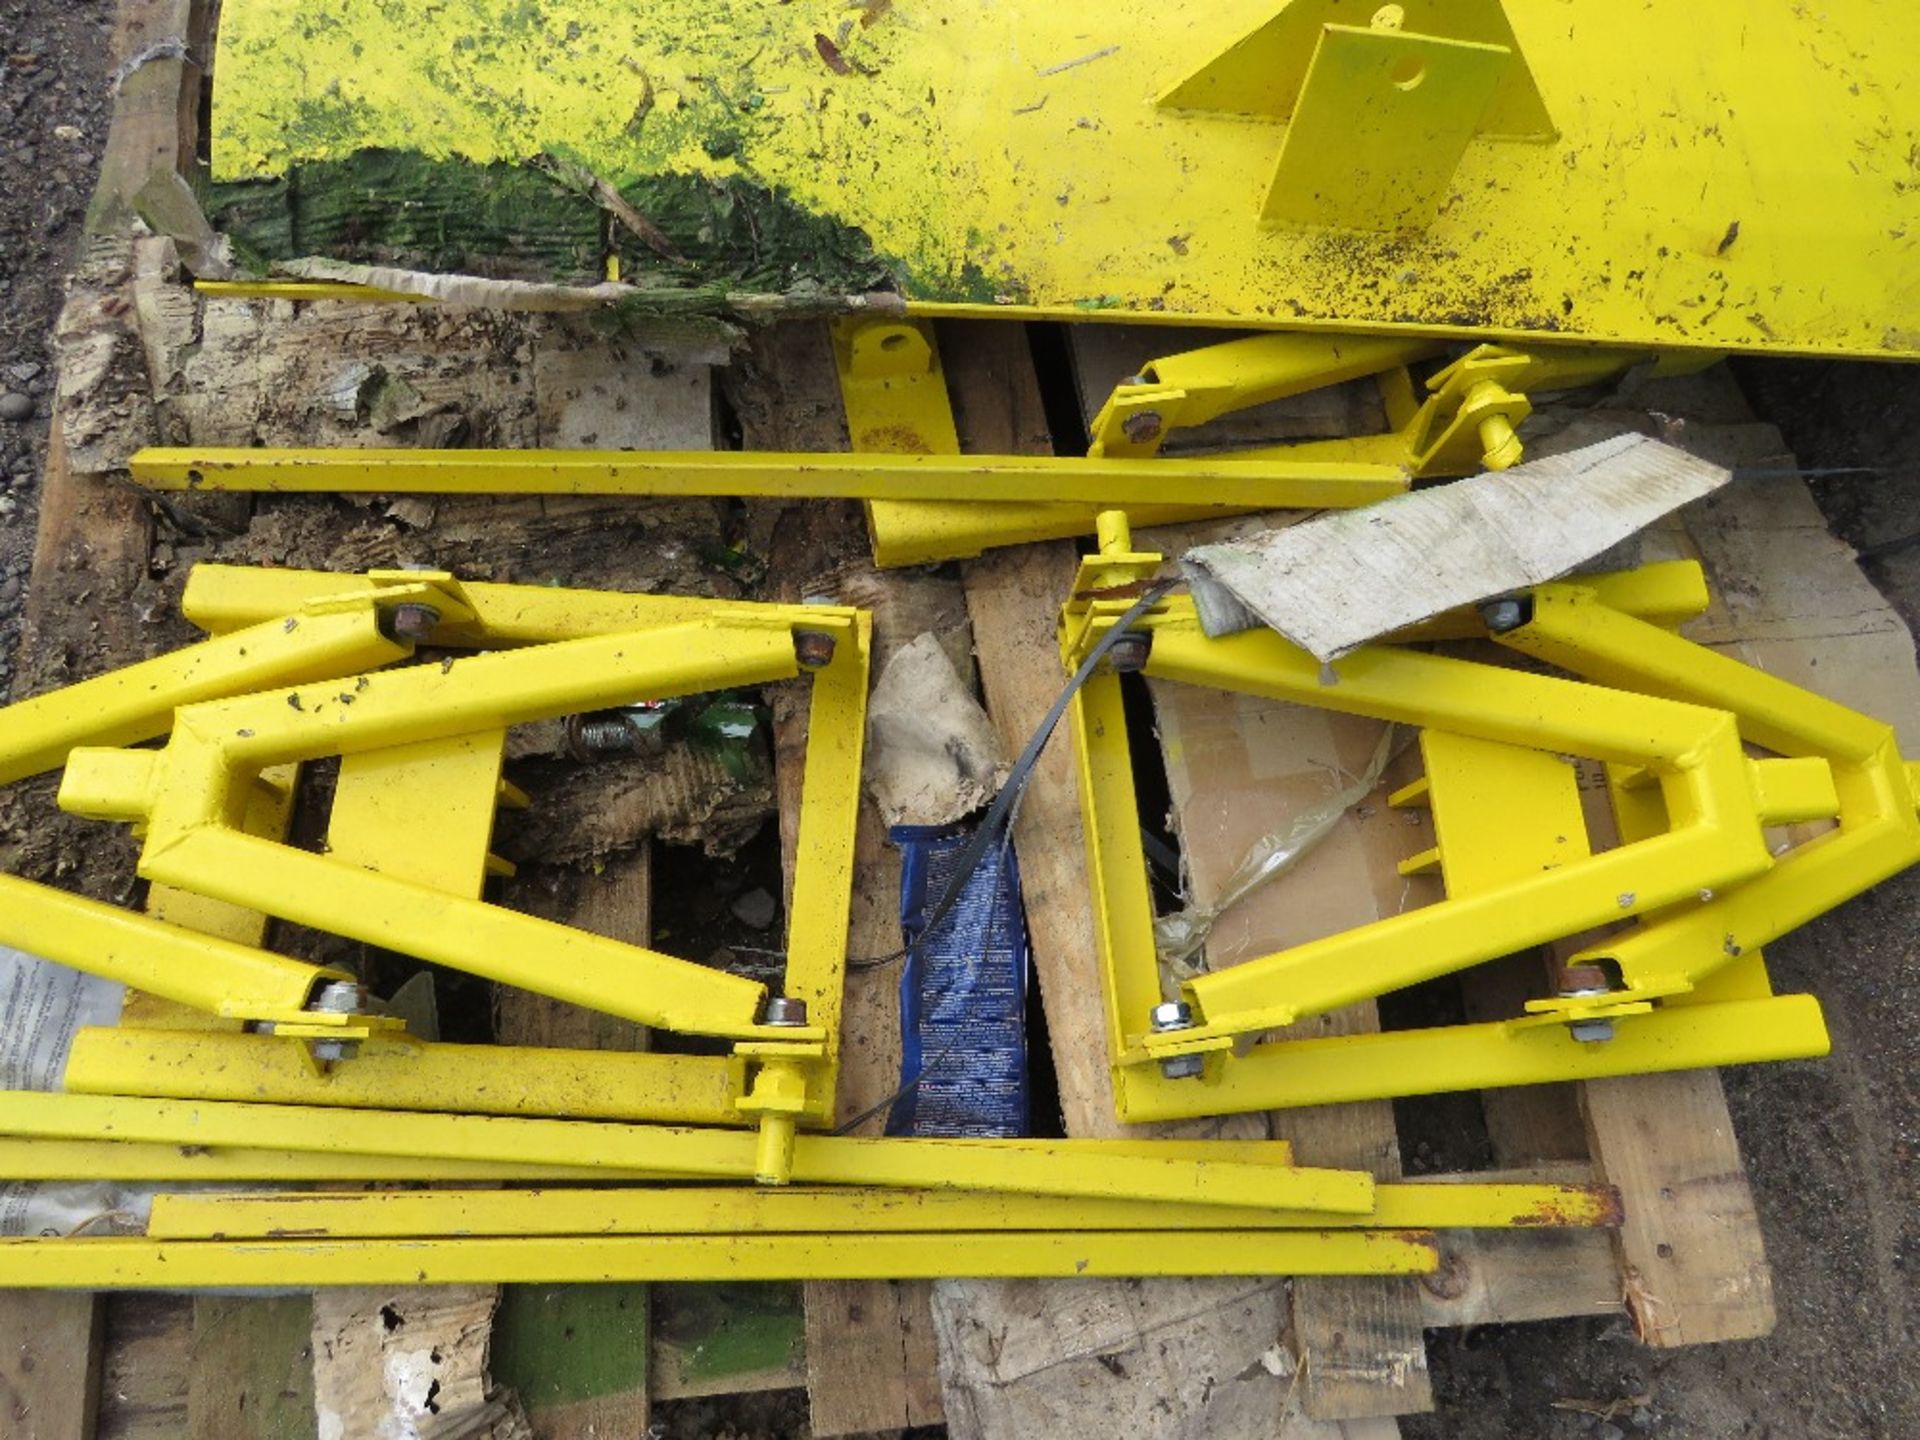 3 X FRONT MOUNTED SNOW PLOUGH BLADES WITH BRACKETS. - Image 2 of 5